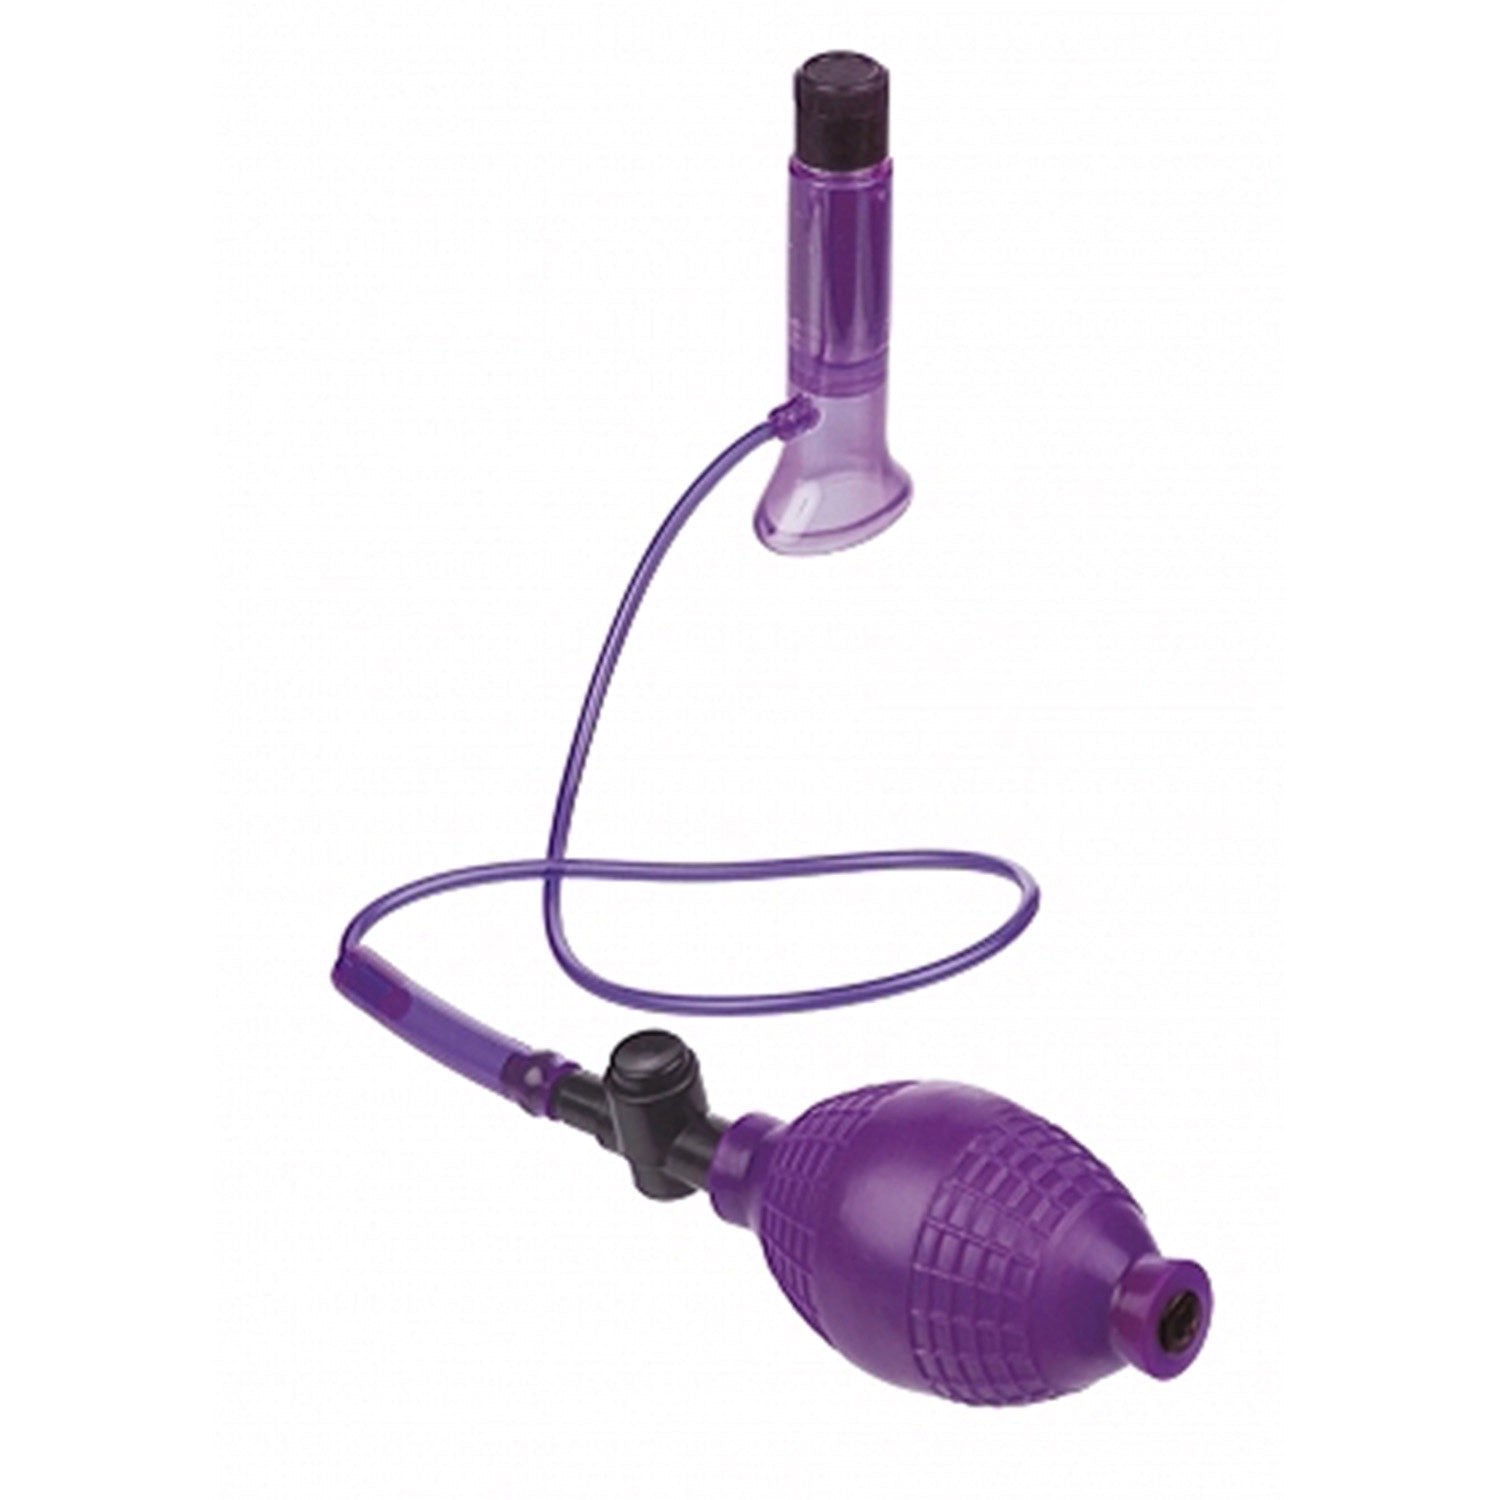 Fetish Fantasy Series Vibrating Clit Suck-her - Purple Vibrating Clit Pump by Pipedream